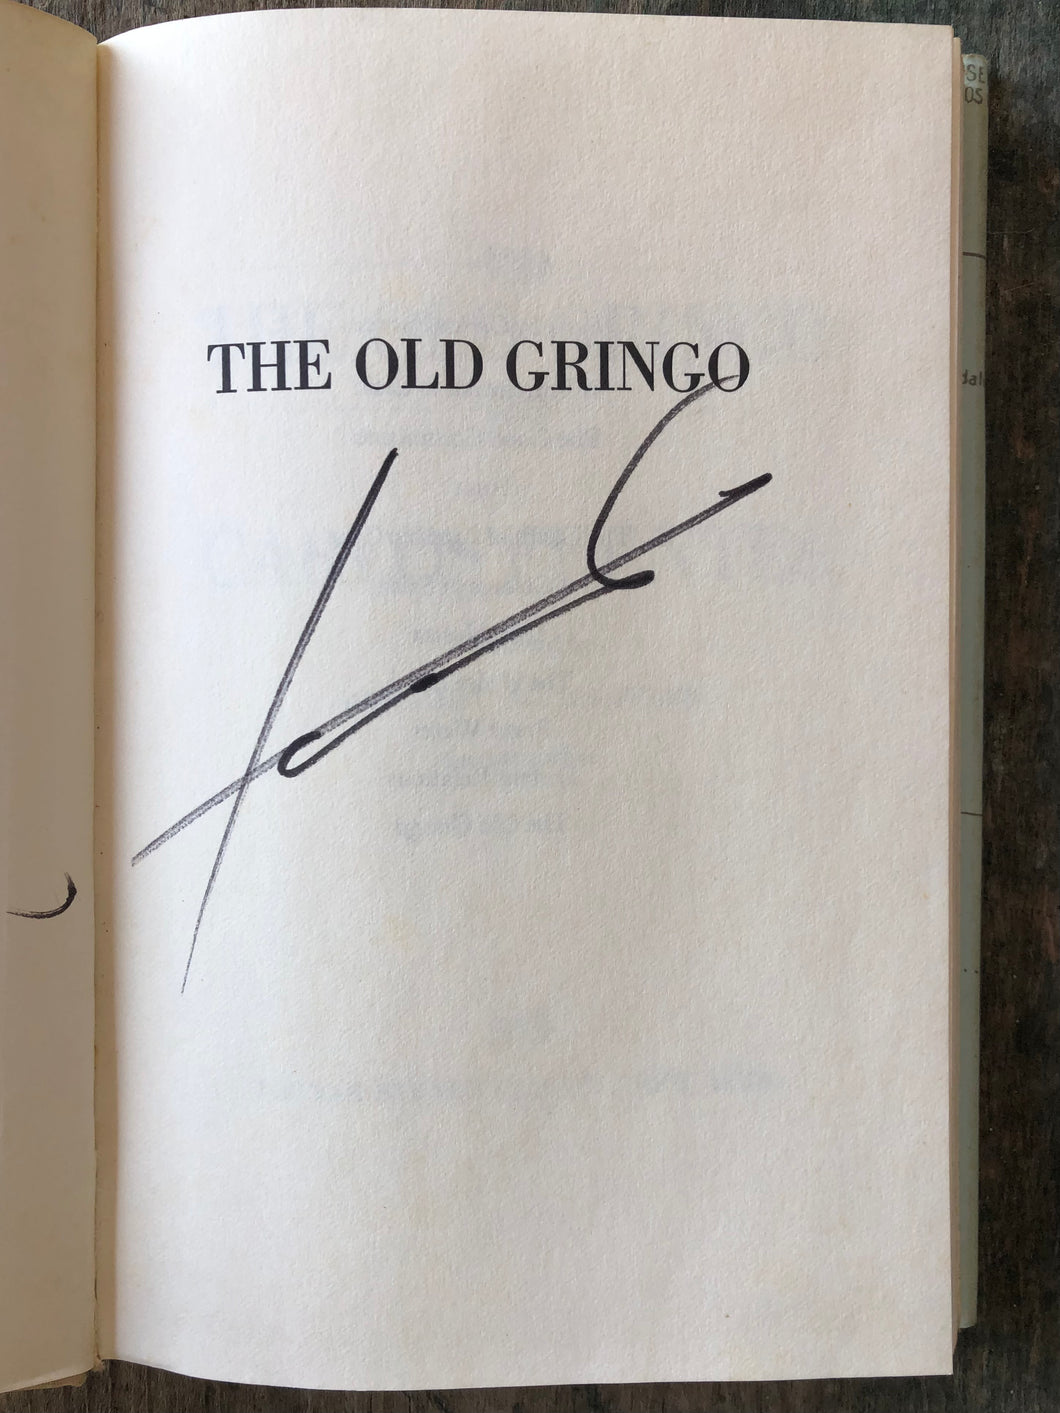 The Old Gringo by Carlos Fuentes SIGNED